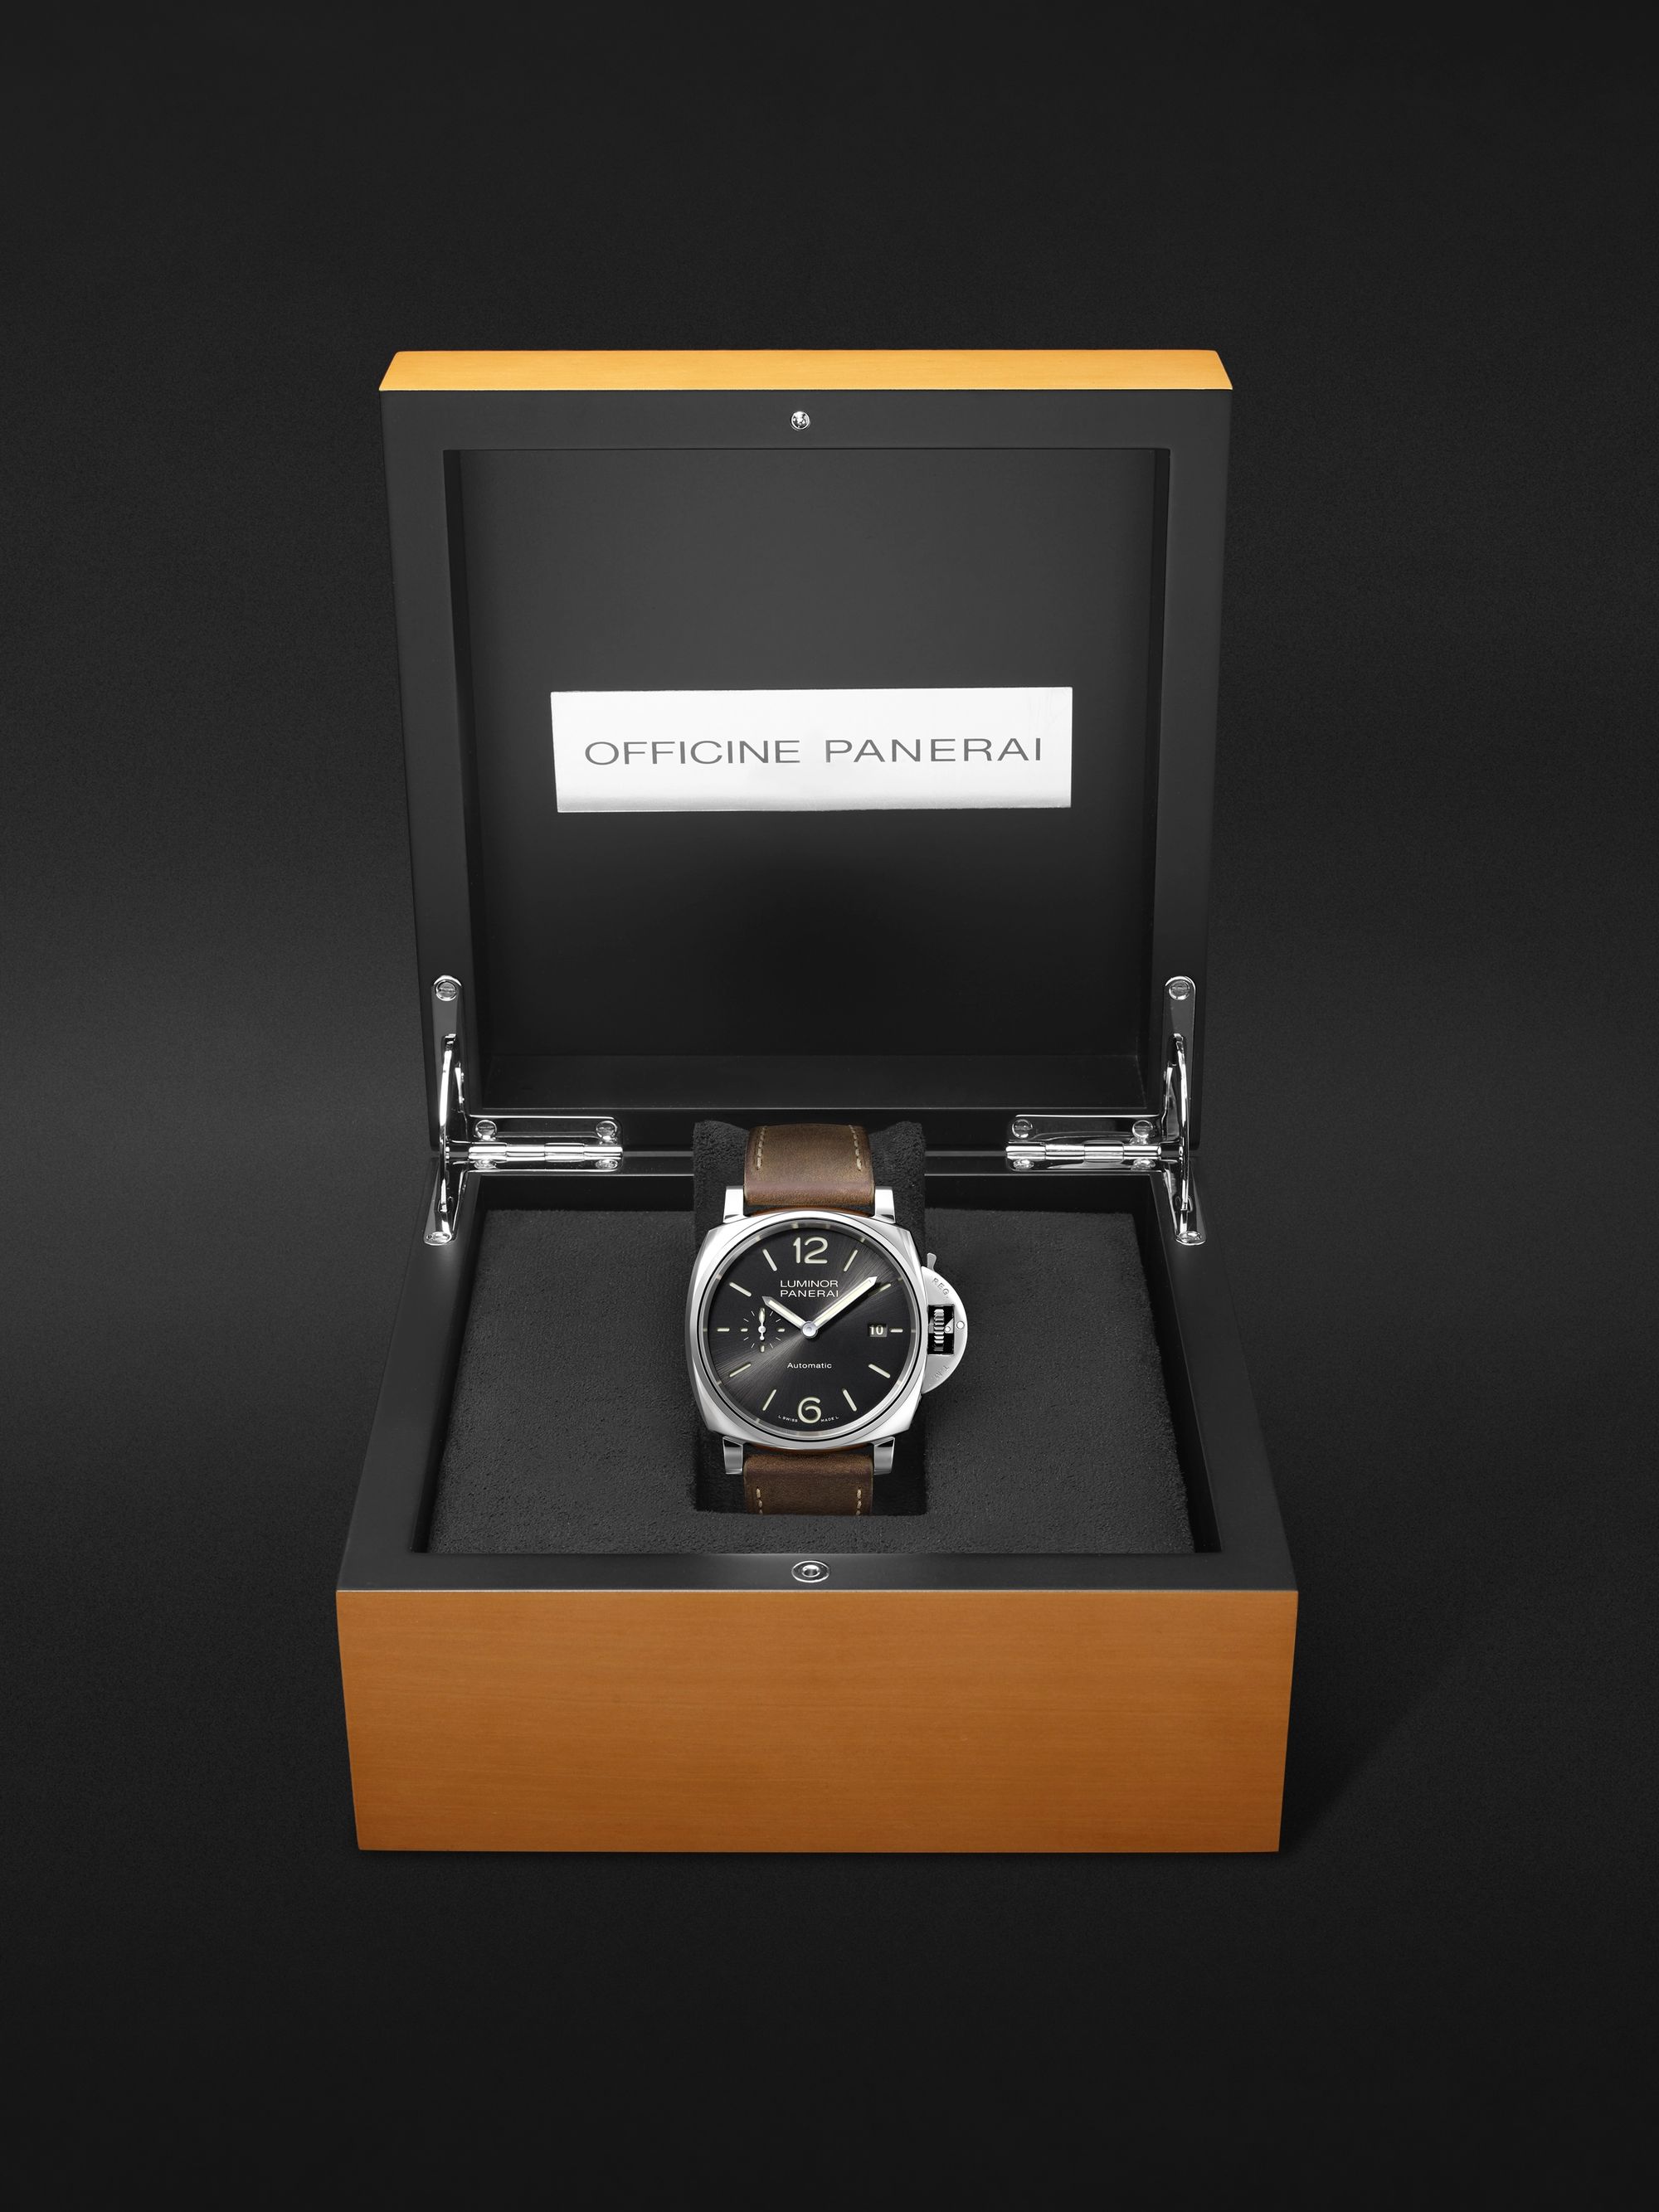 PANERAI Luminor Due Automatic 42mm Stainless Steel and Leather Watch, Ref. No. PAM00904